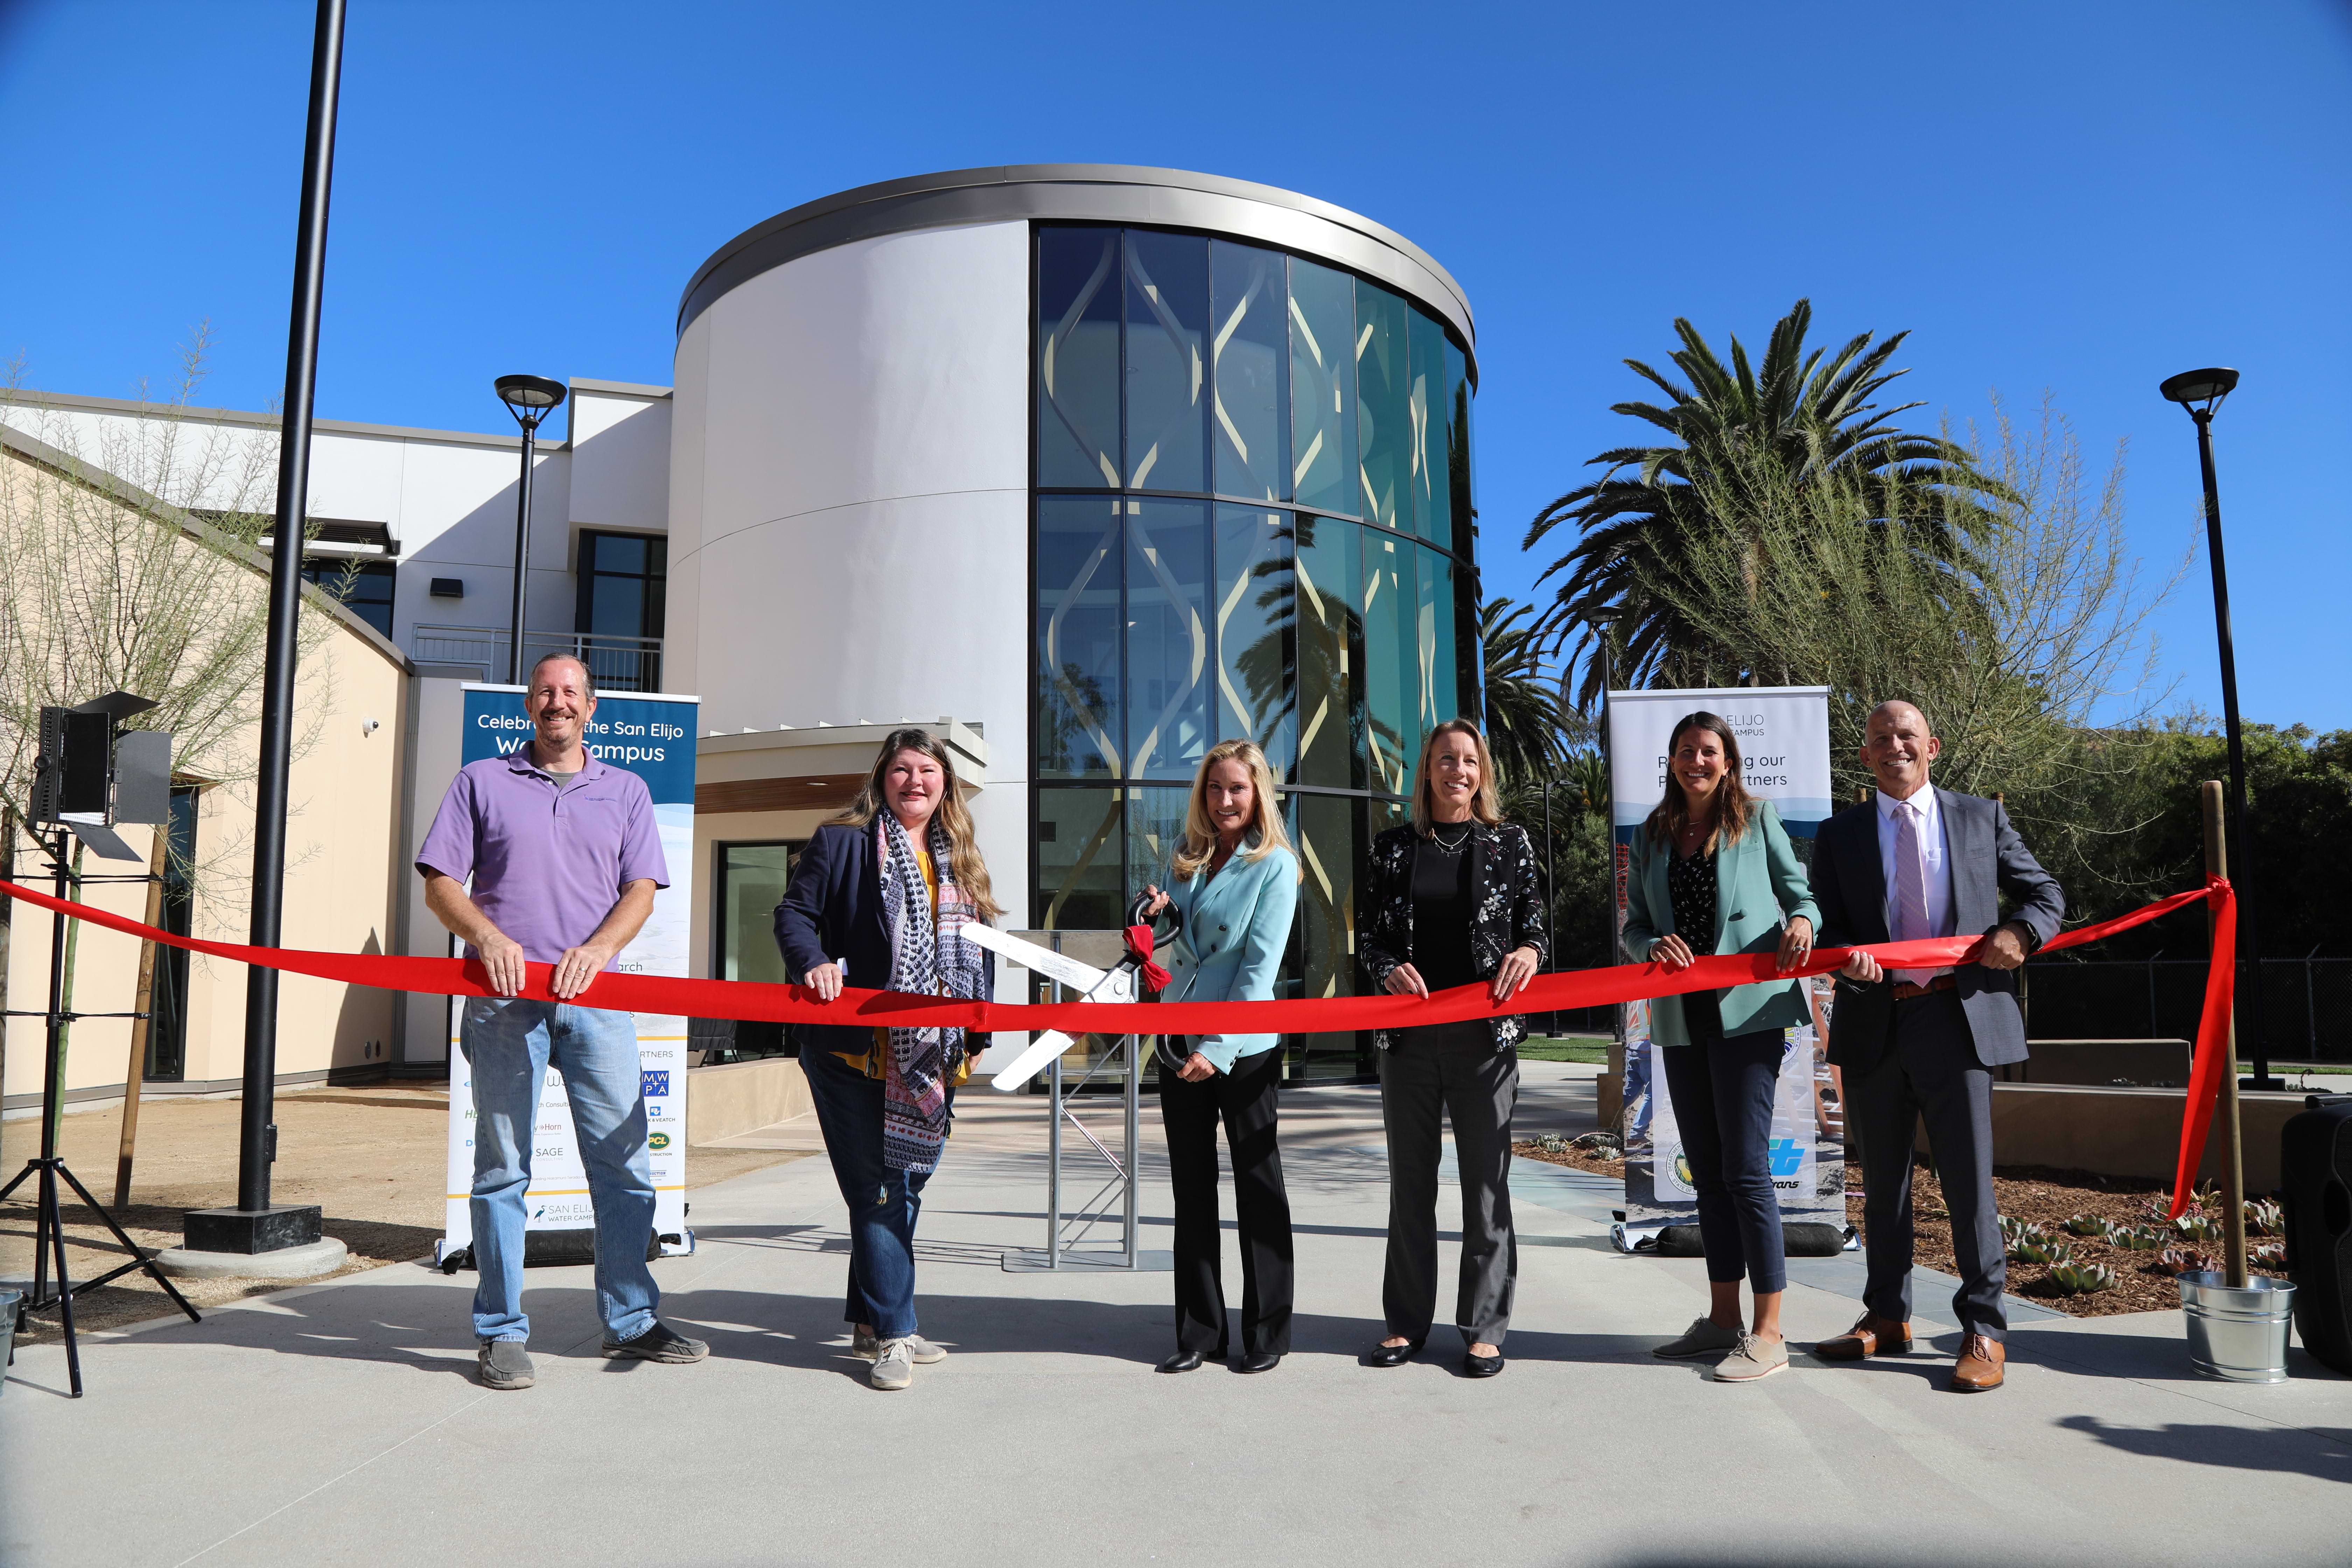 Ribbon-cutting for water campus improvements